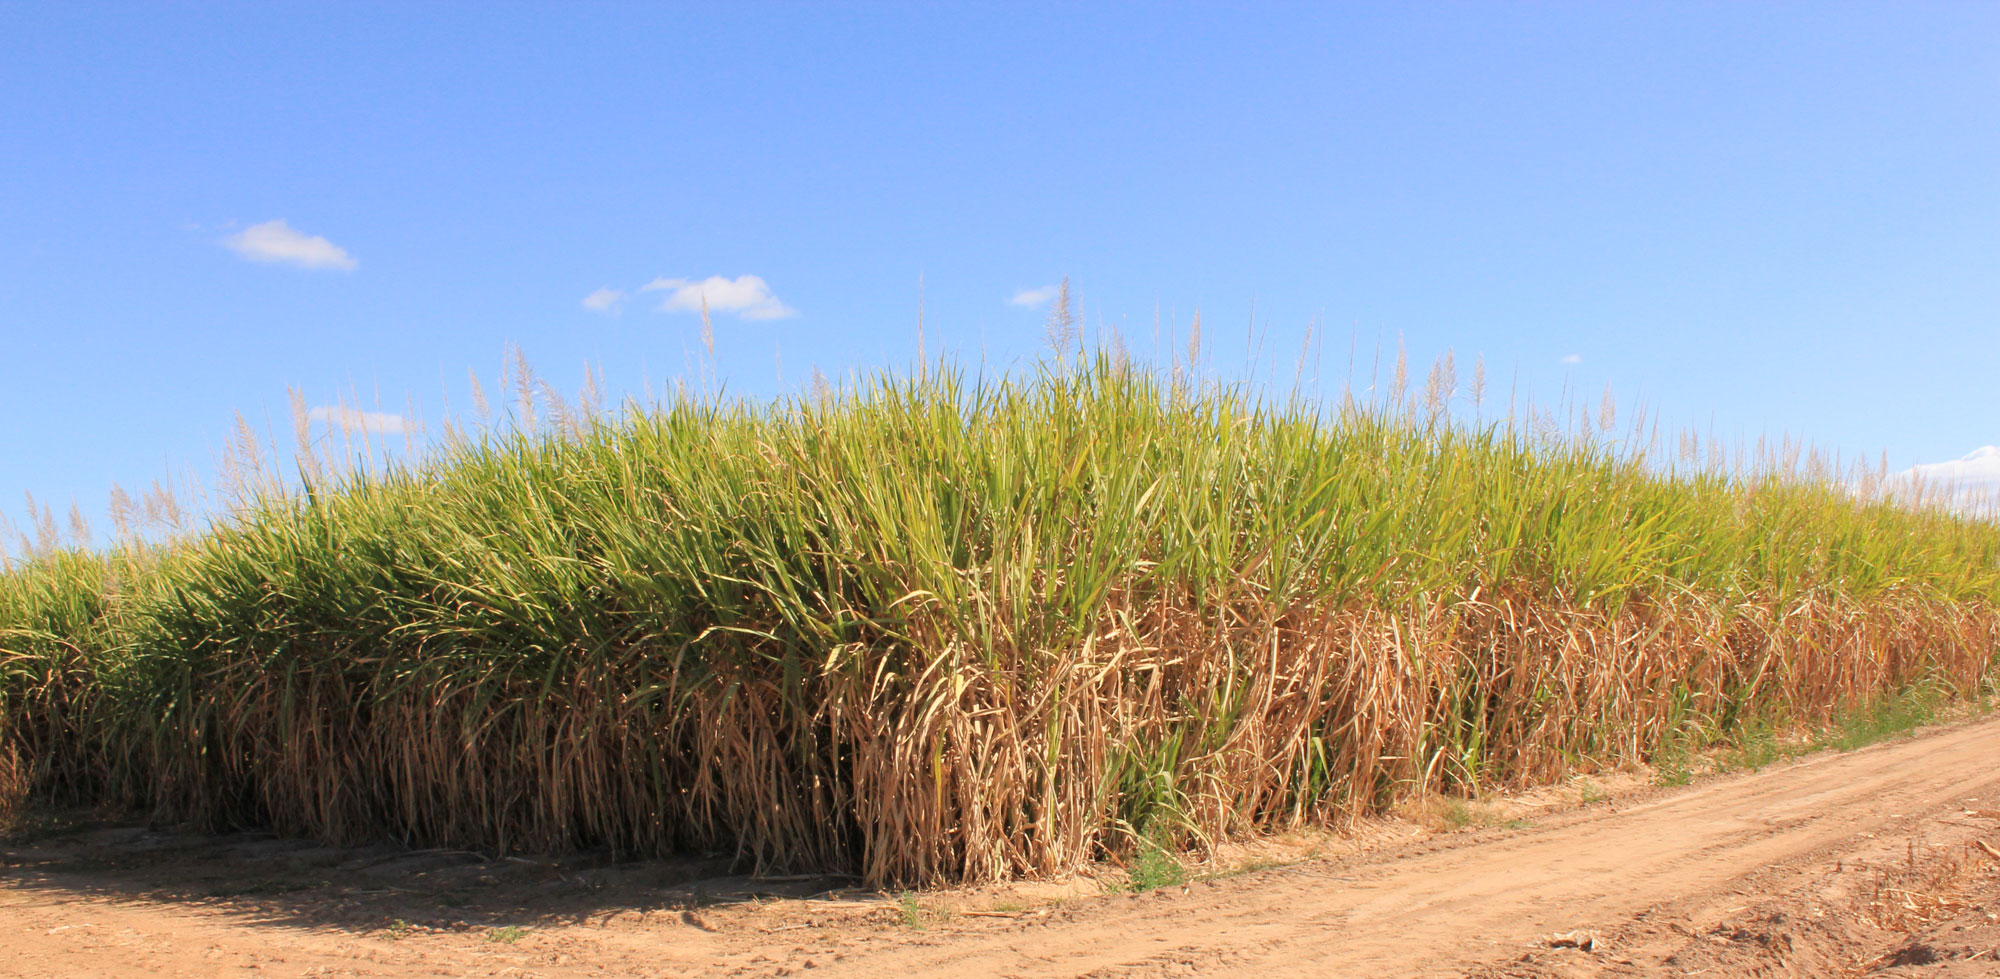 Photograph of a field of cultivated sugarcane in Australia. The sugarcane is in a dense planting with a dirt road running along its edge. The grasses are yellowish at the base, green near their tops. 